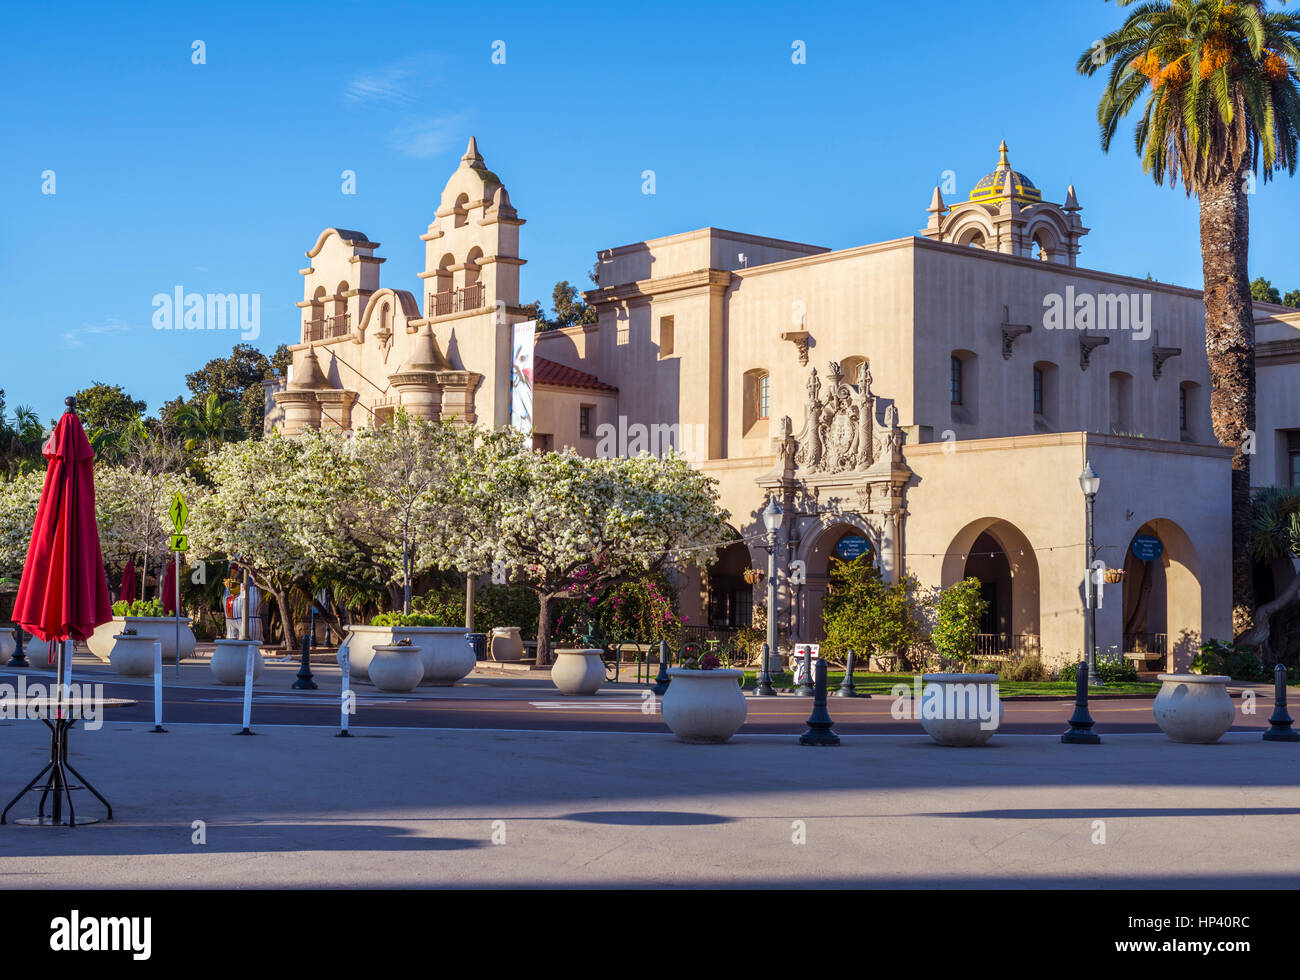 The House of Charm building in the early morning. Balboa Park, San Diego, California, USA. Stock Photo